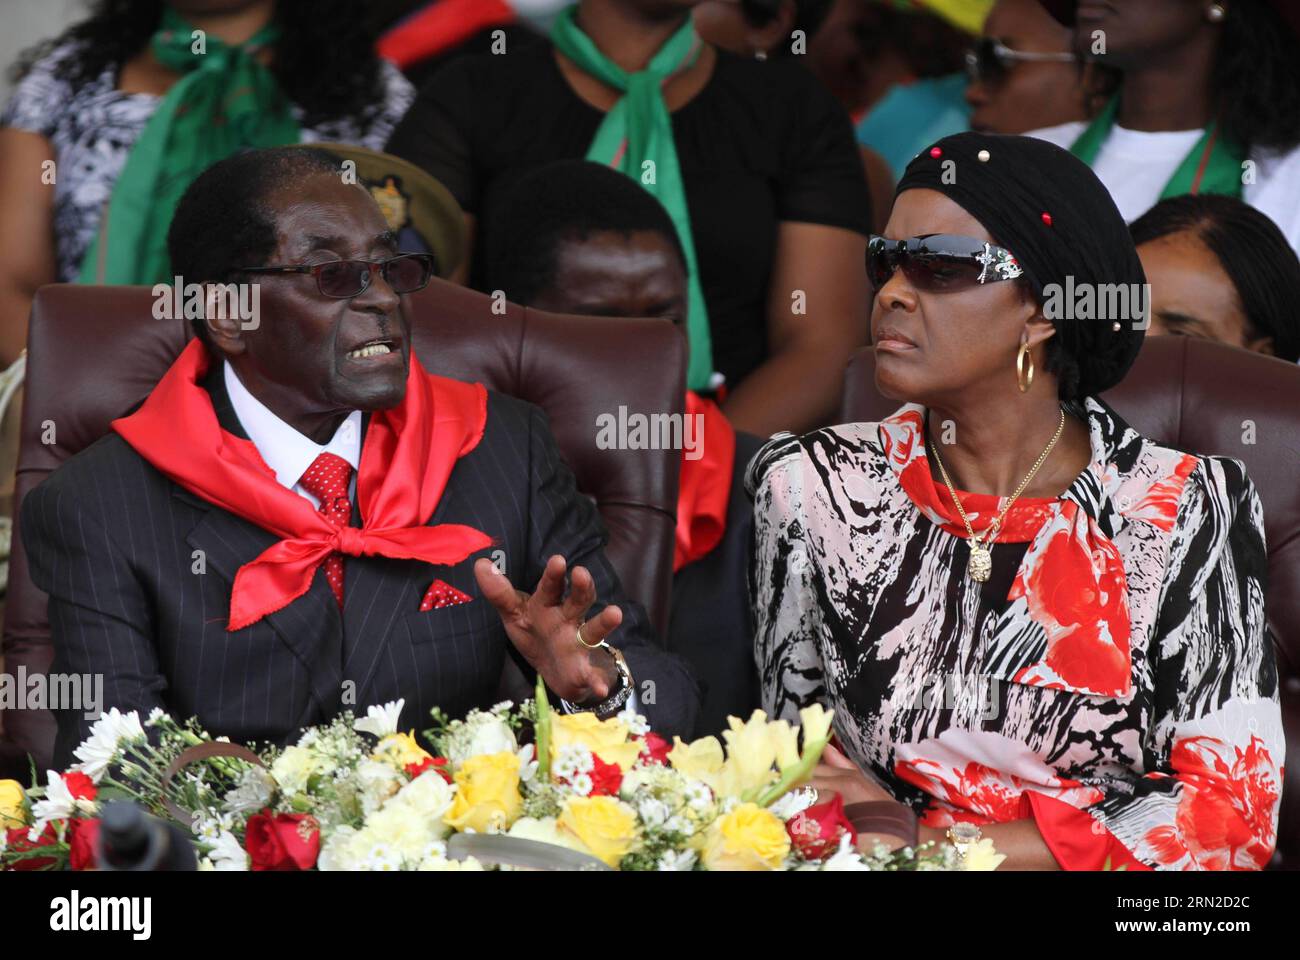 (150228) -- VICTORIA FALLS (ZIMBABWE), Feb. 28, 2015 () -- Zimbabwean President Robert Mugabe (L) and his wife Grace Mugabe chat on the podium at a public celebration held to mark his 91st birthday in Victoria Falls, Zimbabwe, Feb. 28, 2015. Mugabe, who turns 91 this month, is the oldest leader in the world and one of the longest-serving African statesmen. Having ruled Zimbabwe for 35 years since independence, Mugabe was endorsed by the ruling ZANU-PF party as the sole candidate to contest at the age of 94 in the next presidential election in 2018. () ZIMBABWE-VICTORIA FALLS-MUGABE-BIRTHDAY Xi Stock Photo